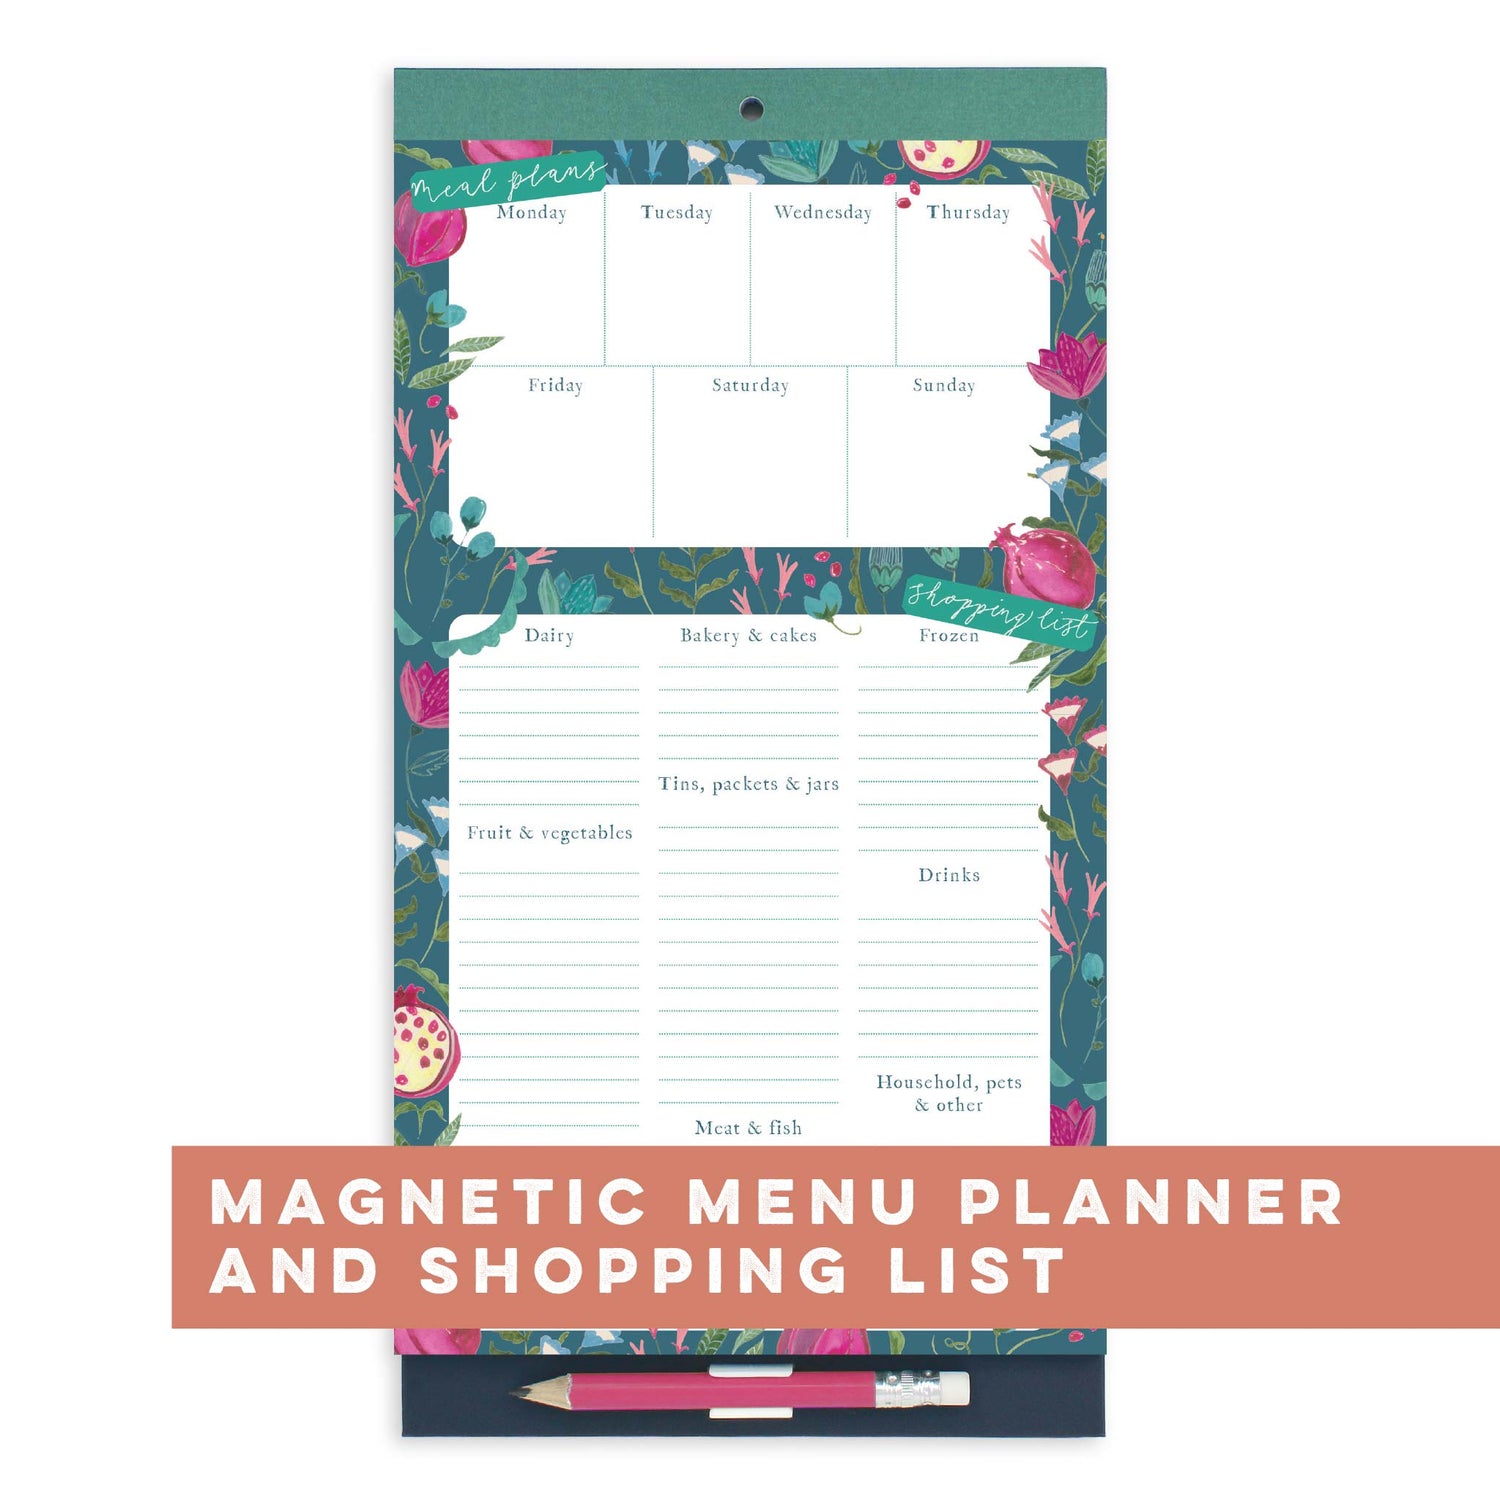 Magnetic Menu Planner and Shopping List